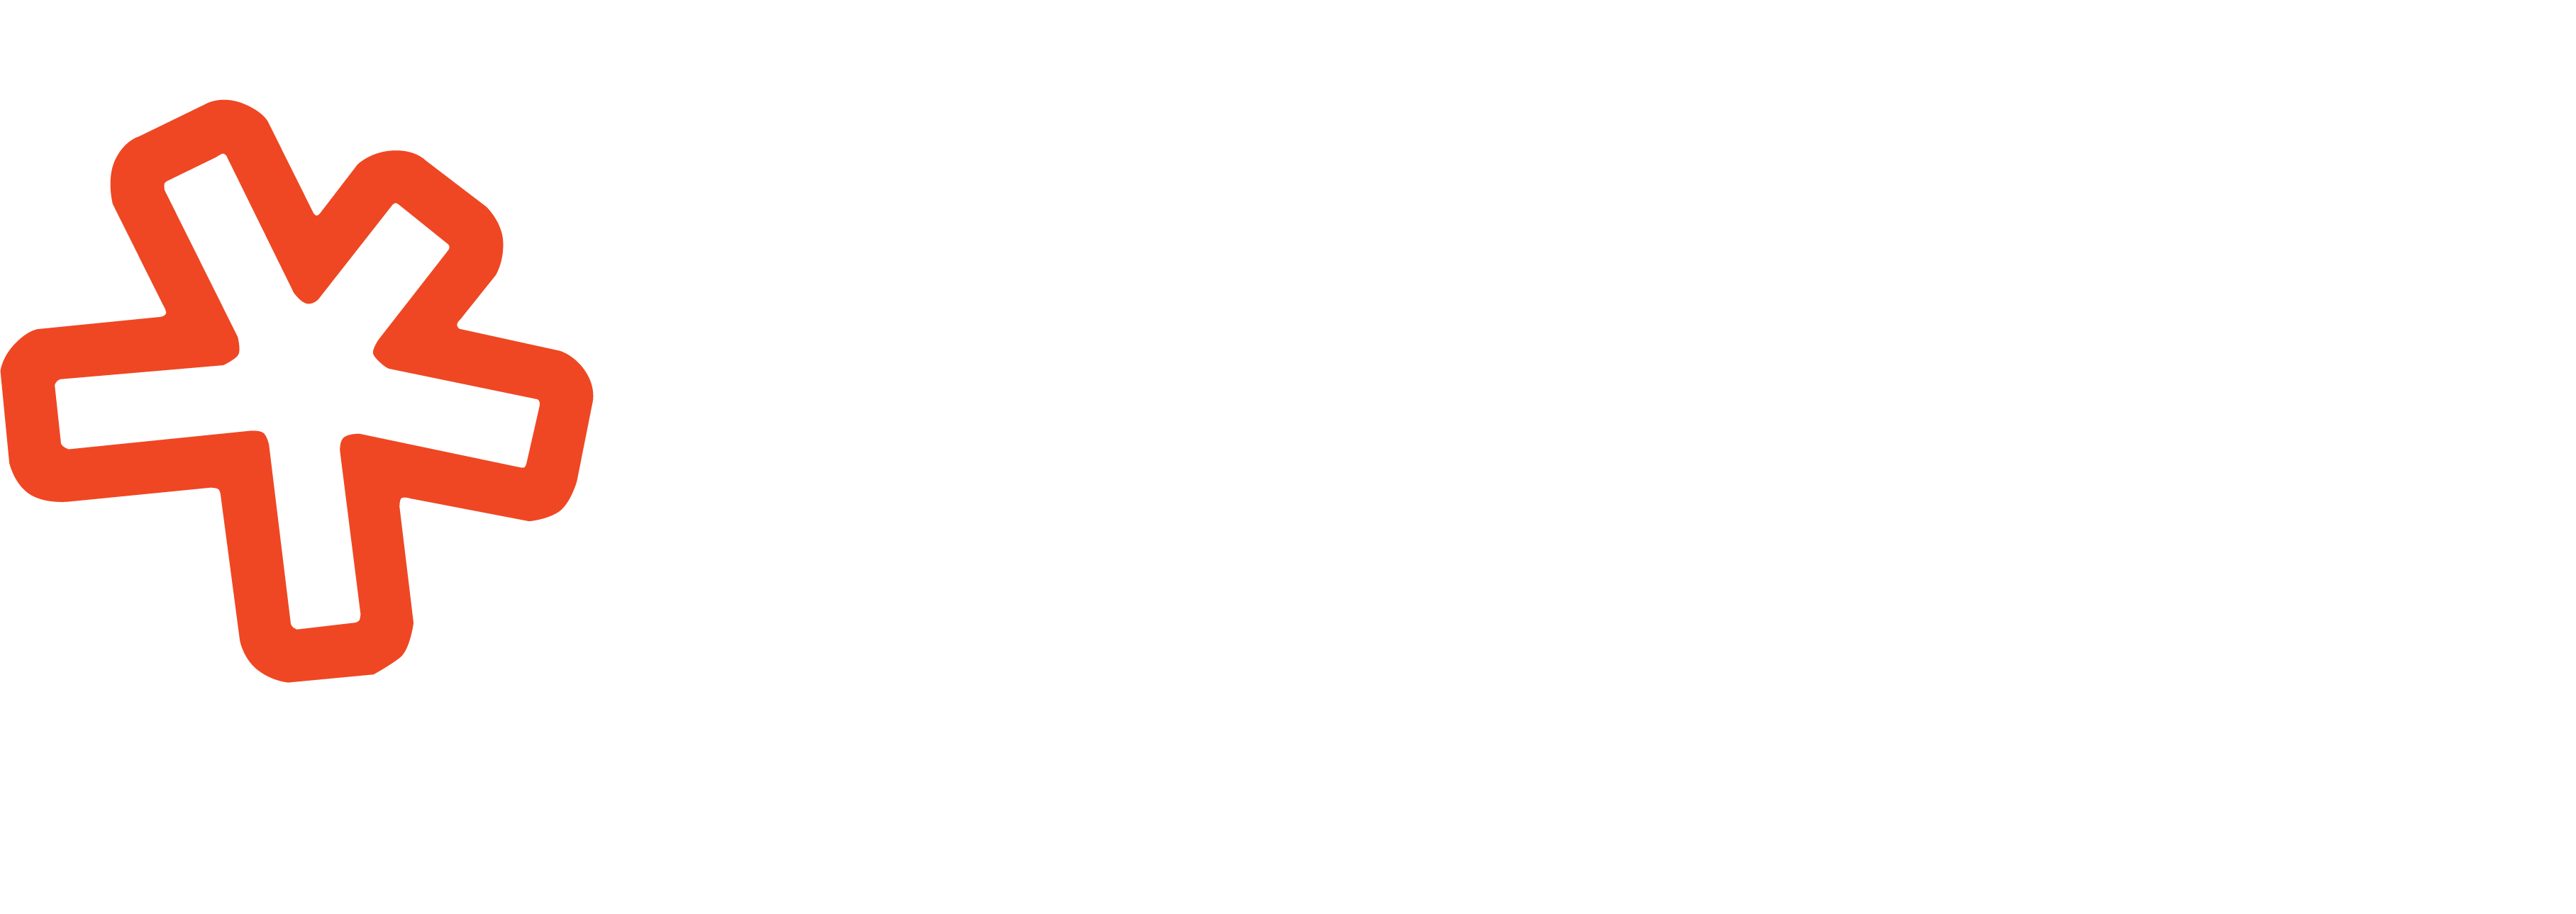 5463daf69d93a2990f0bf98e_Uncommon-Individual-Foundation-Logo.png